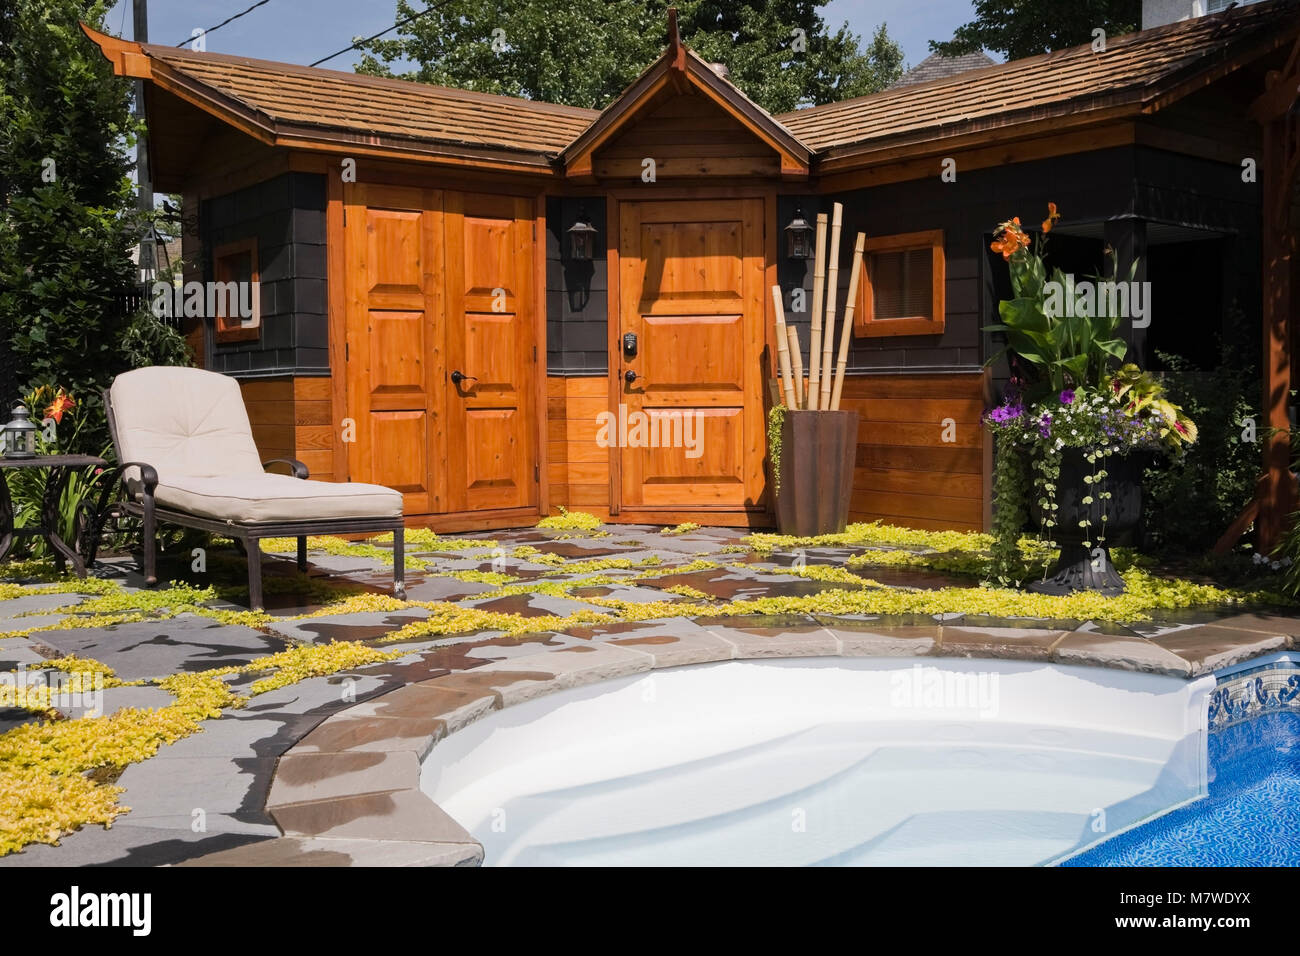 Long chair on patio stones next to a storage shed in a landscaped residential backyard in summer. Stock Photo